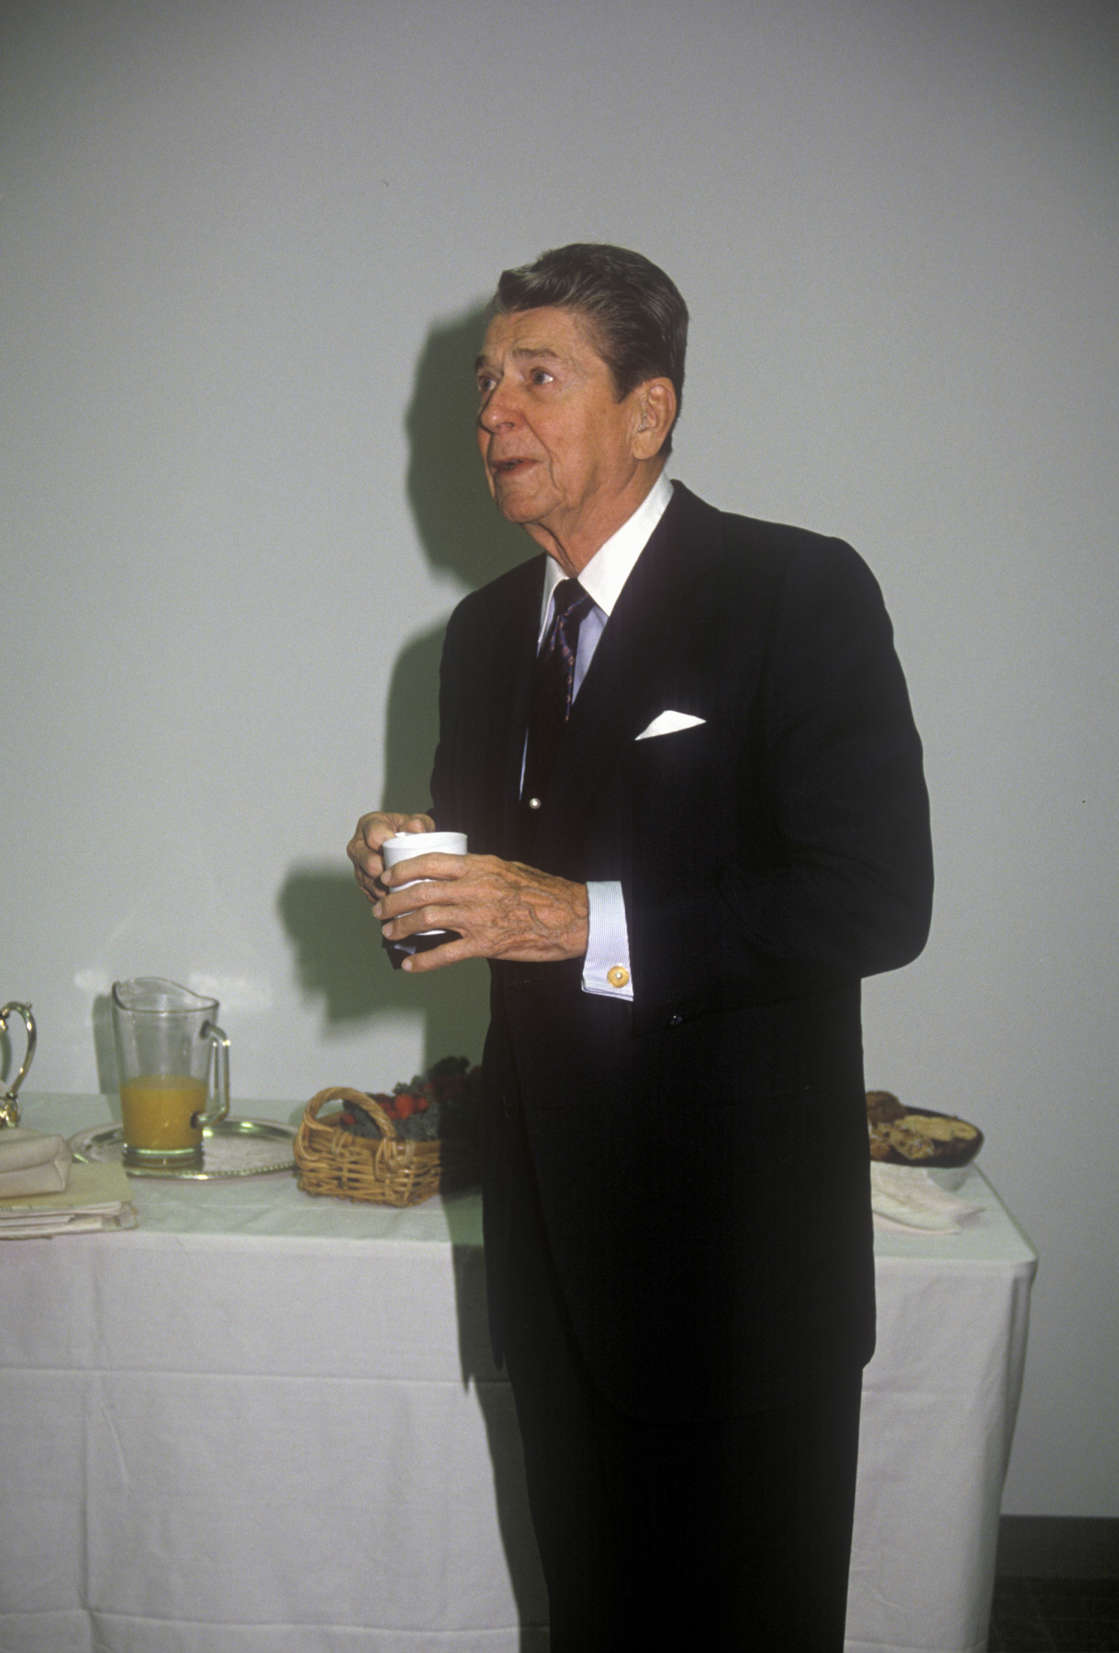 President Ronald Reagan taking a coffee break (Photo by Visions of America/UIG via Getty Images)